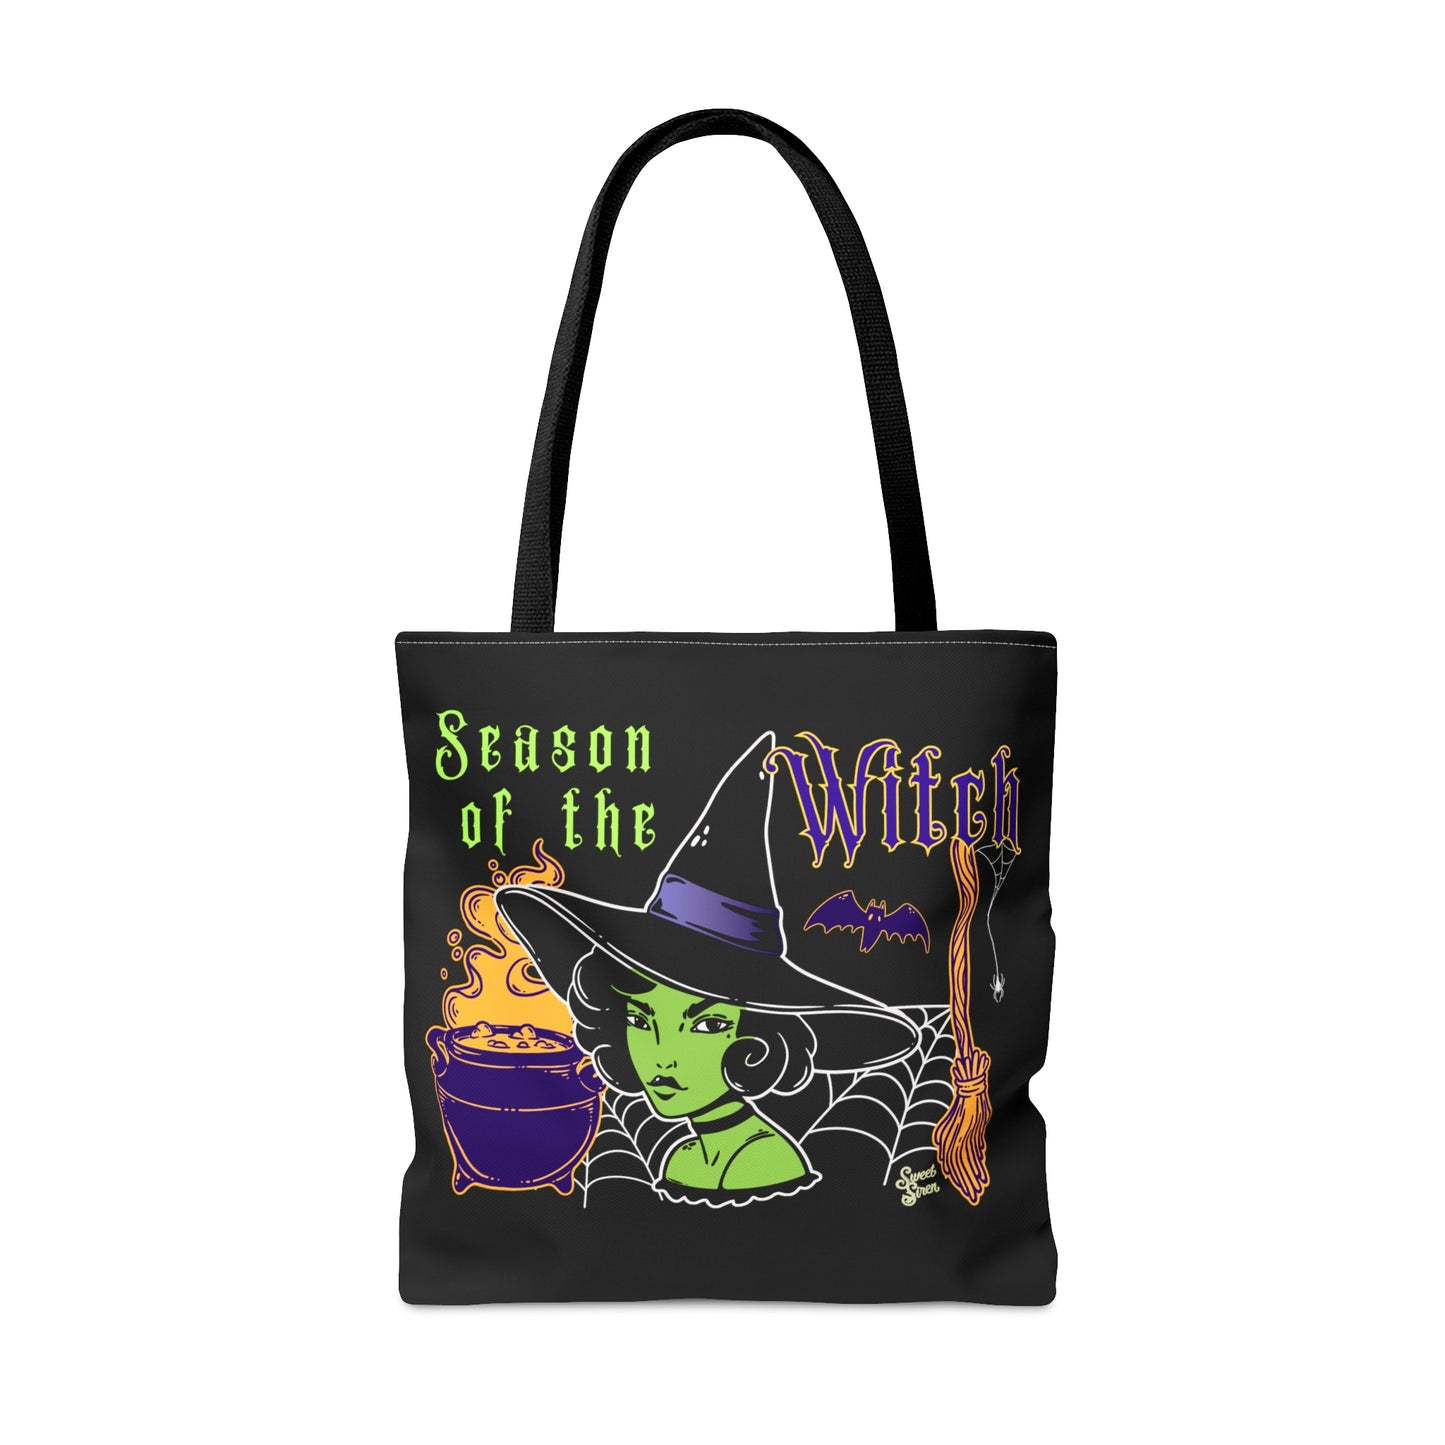 Season of the Witch - Tote Bag